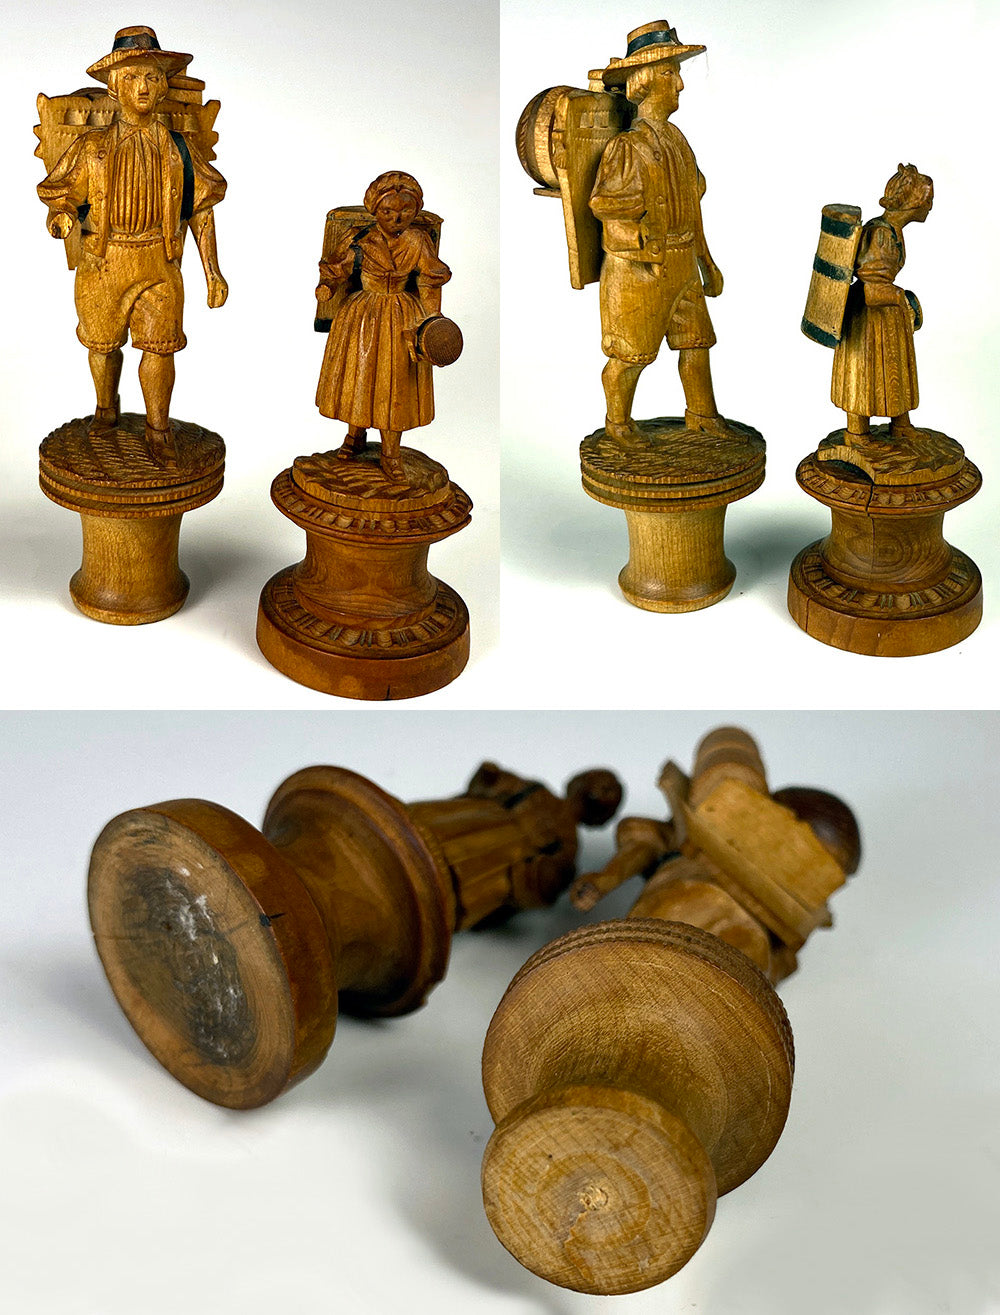 2 Rare Tiny Antique Swiss Black Forest Hand Carved Figures are Sewing Thread Spools